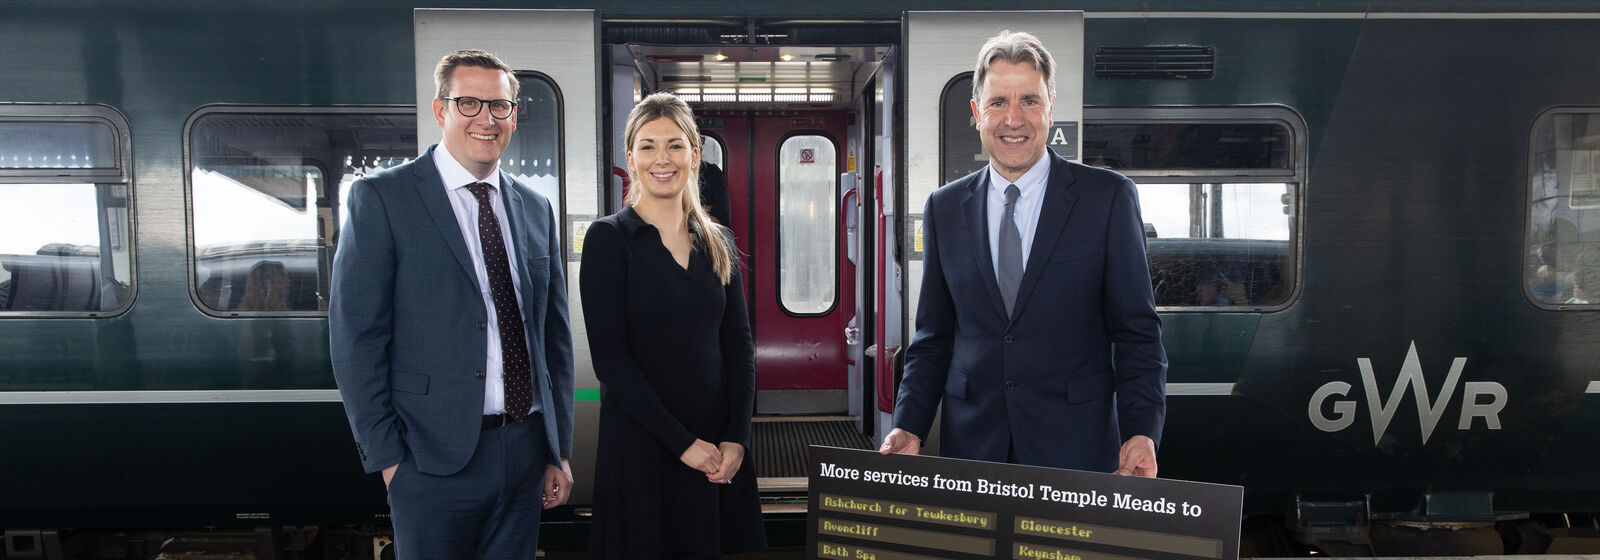 Mayor and two others stand in front of a train